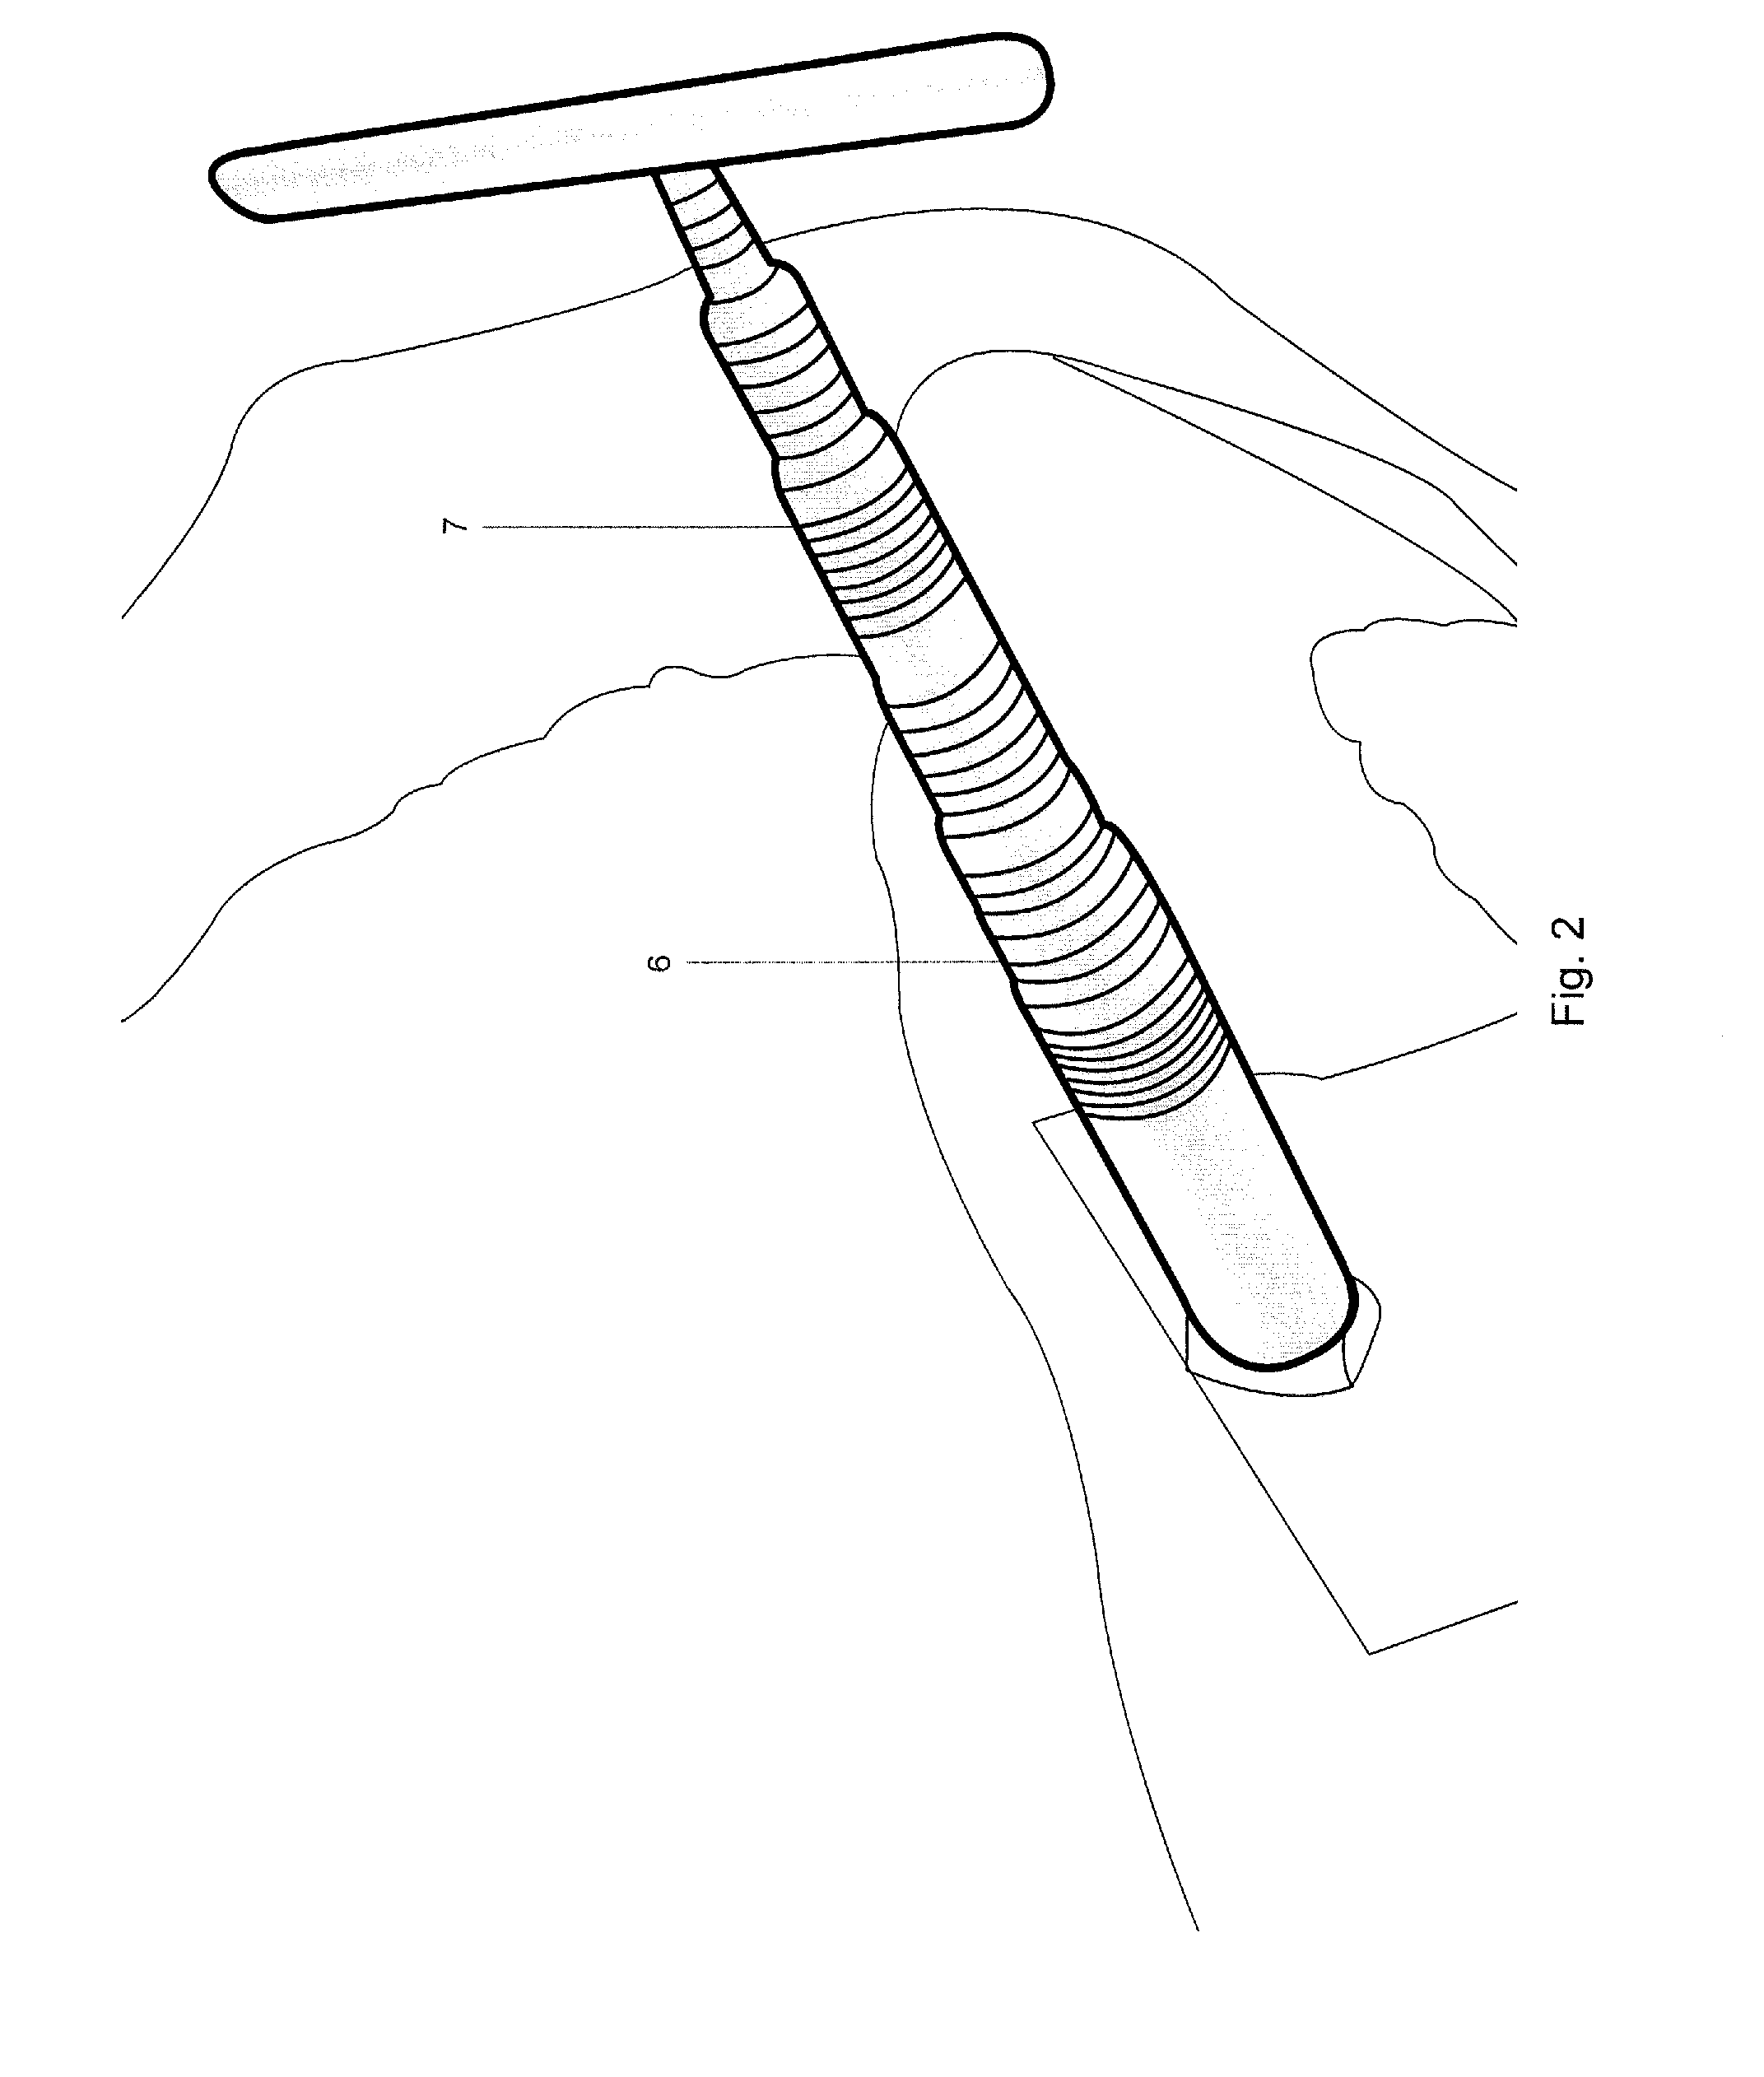 Minimally Invasive Instruments and Methods for the Micro Endoscopic Application of Spine Stabilizers in the Interspinous Space